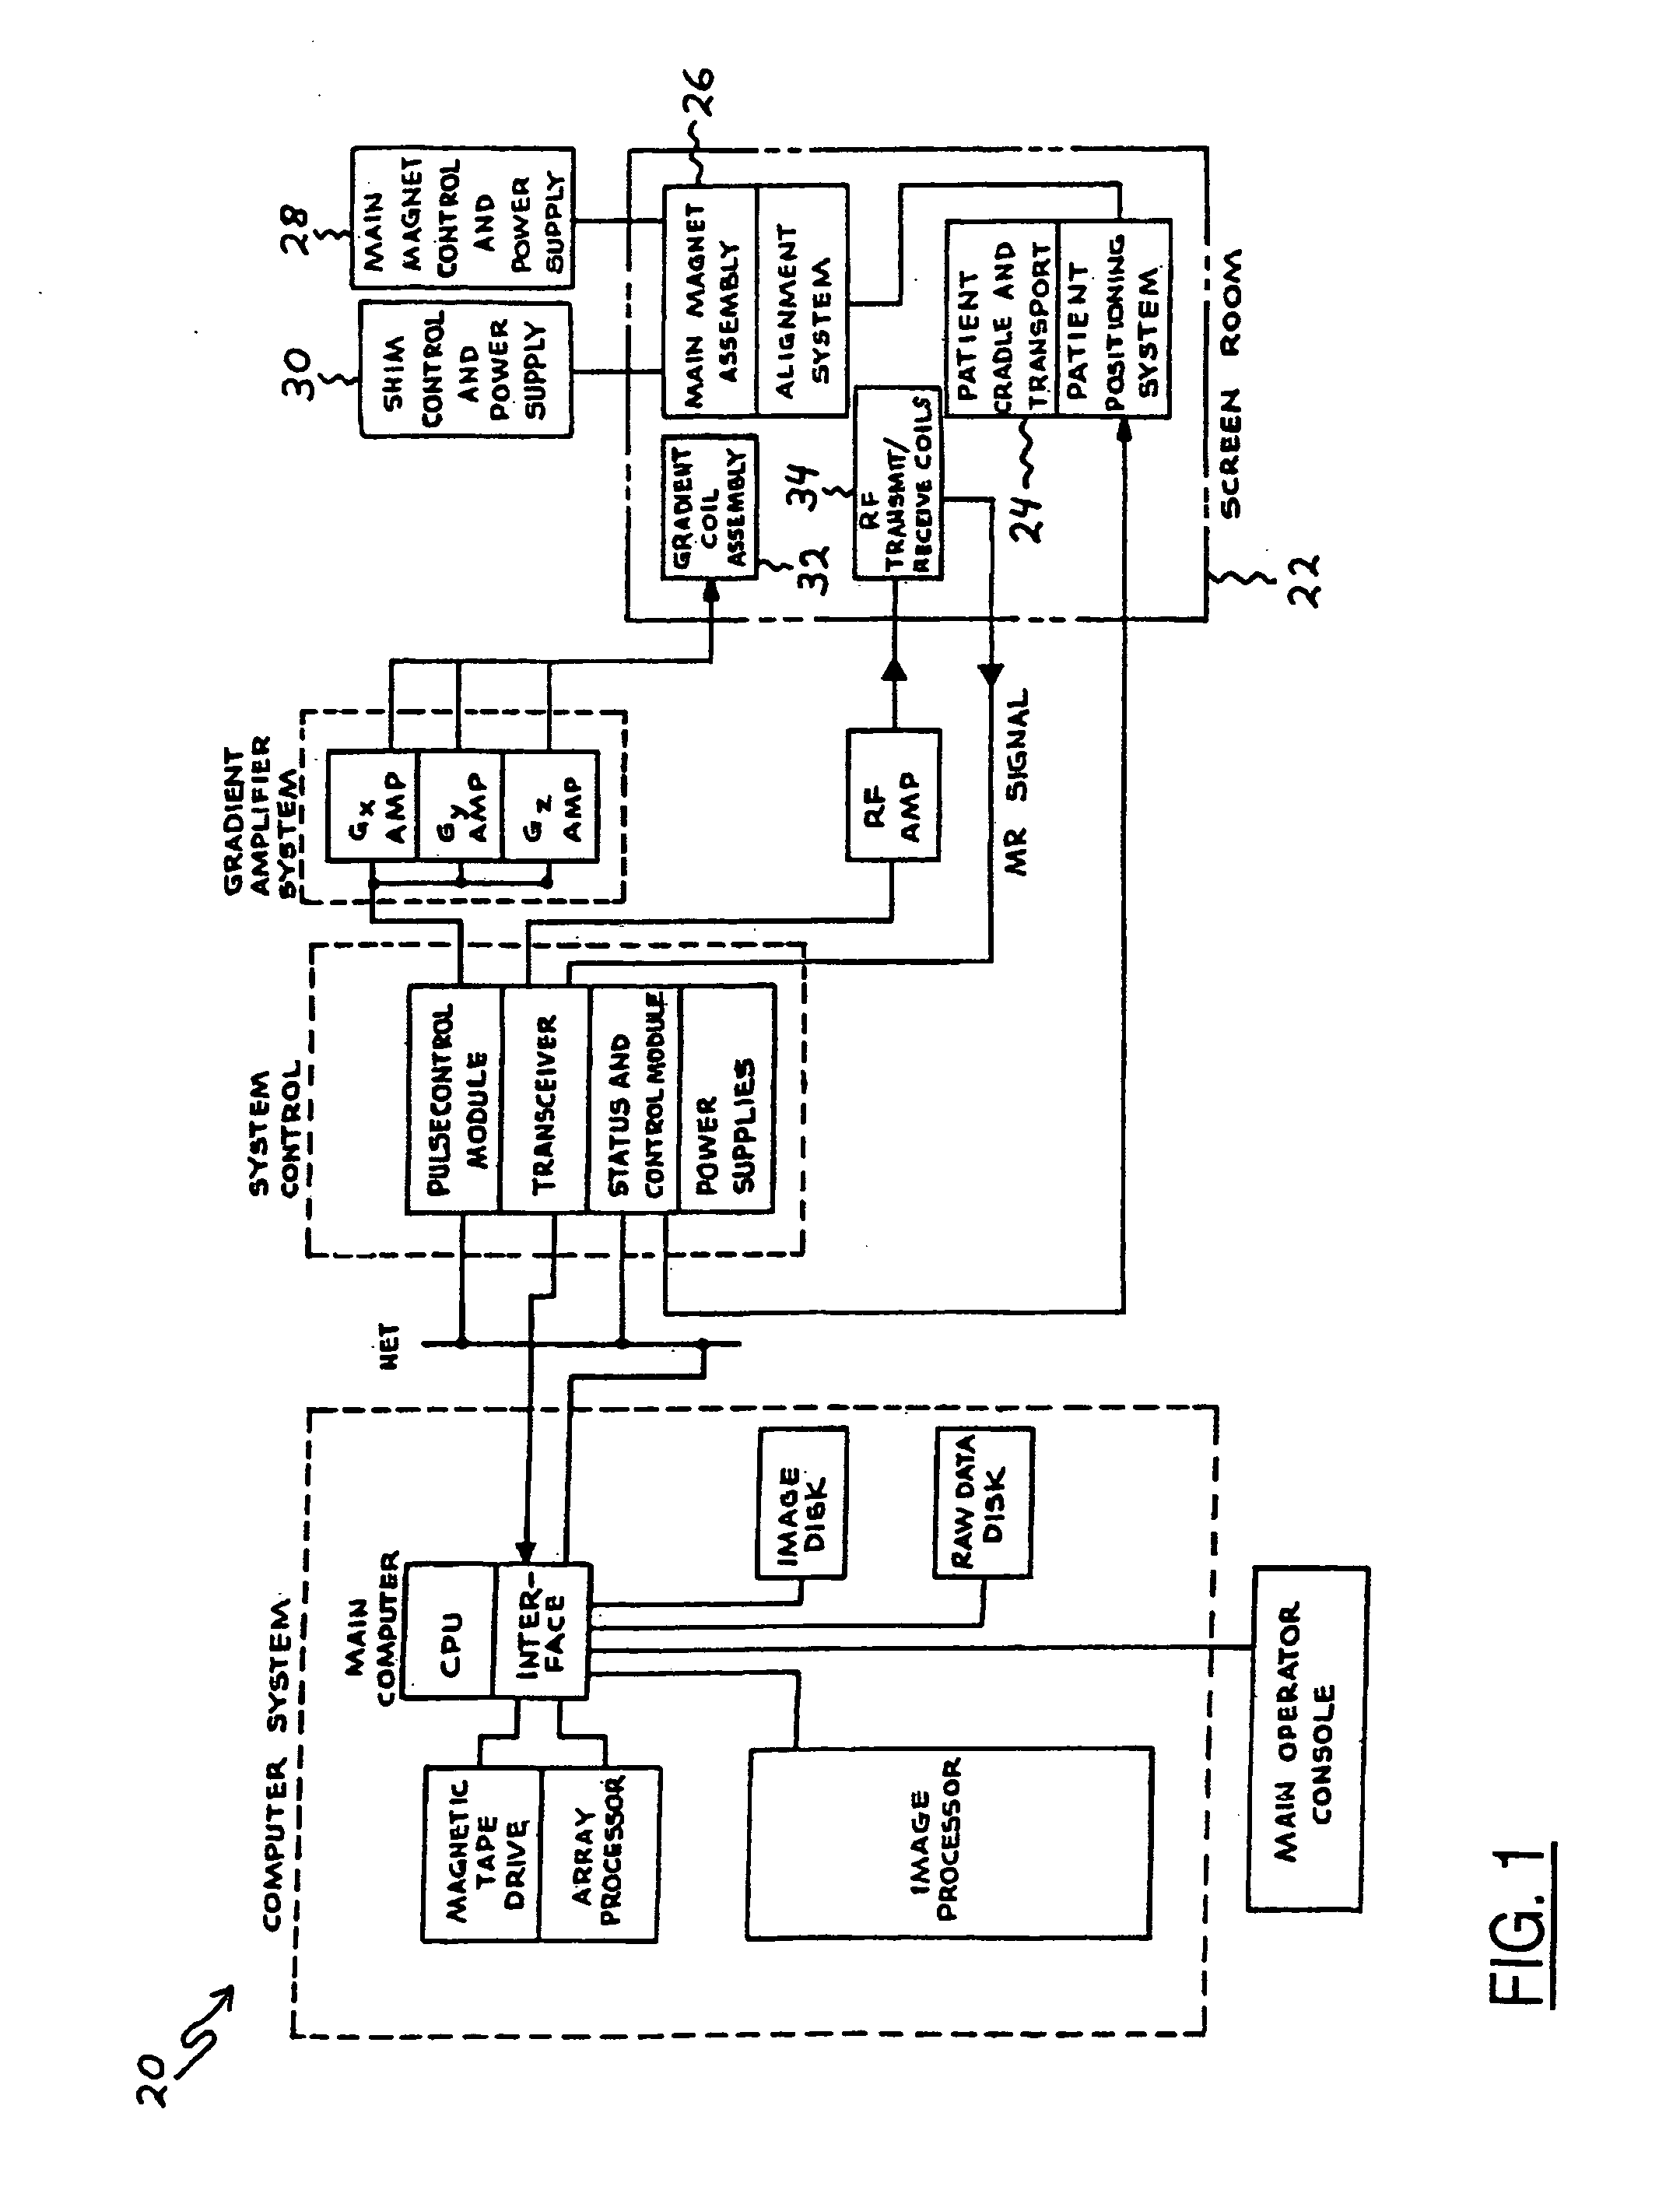 Secondary coil circuit for use with a multi-section protected superconductive magnet coil circuit